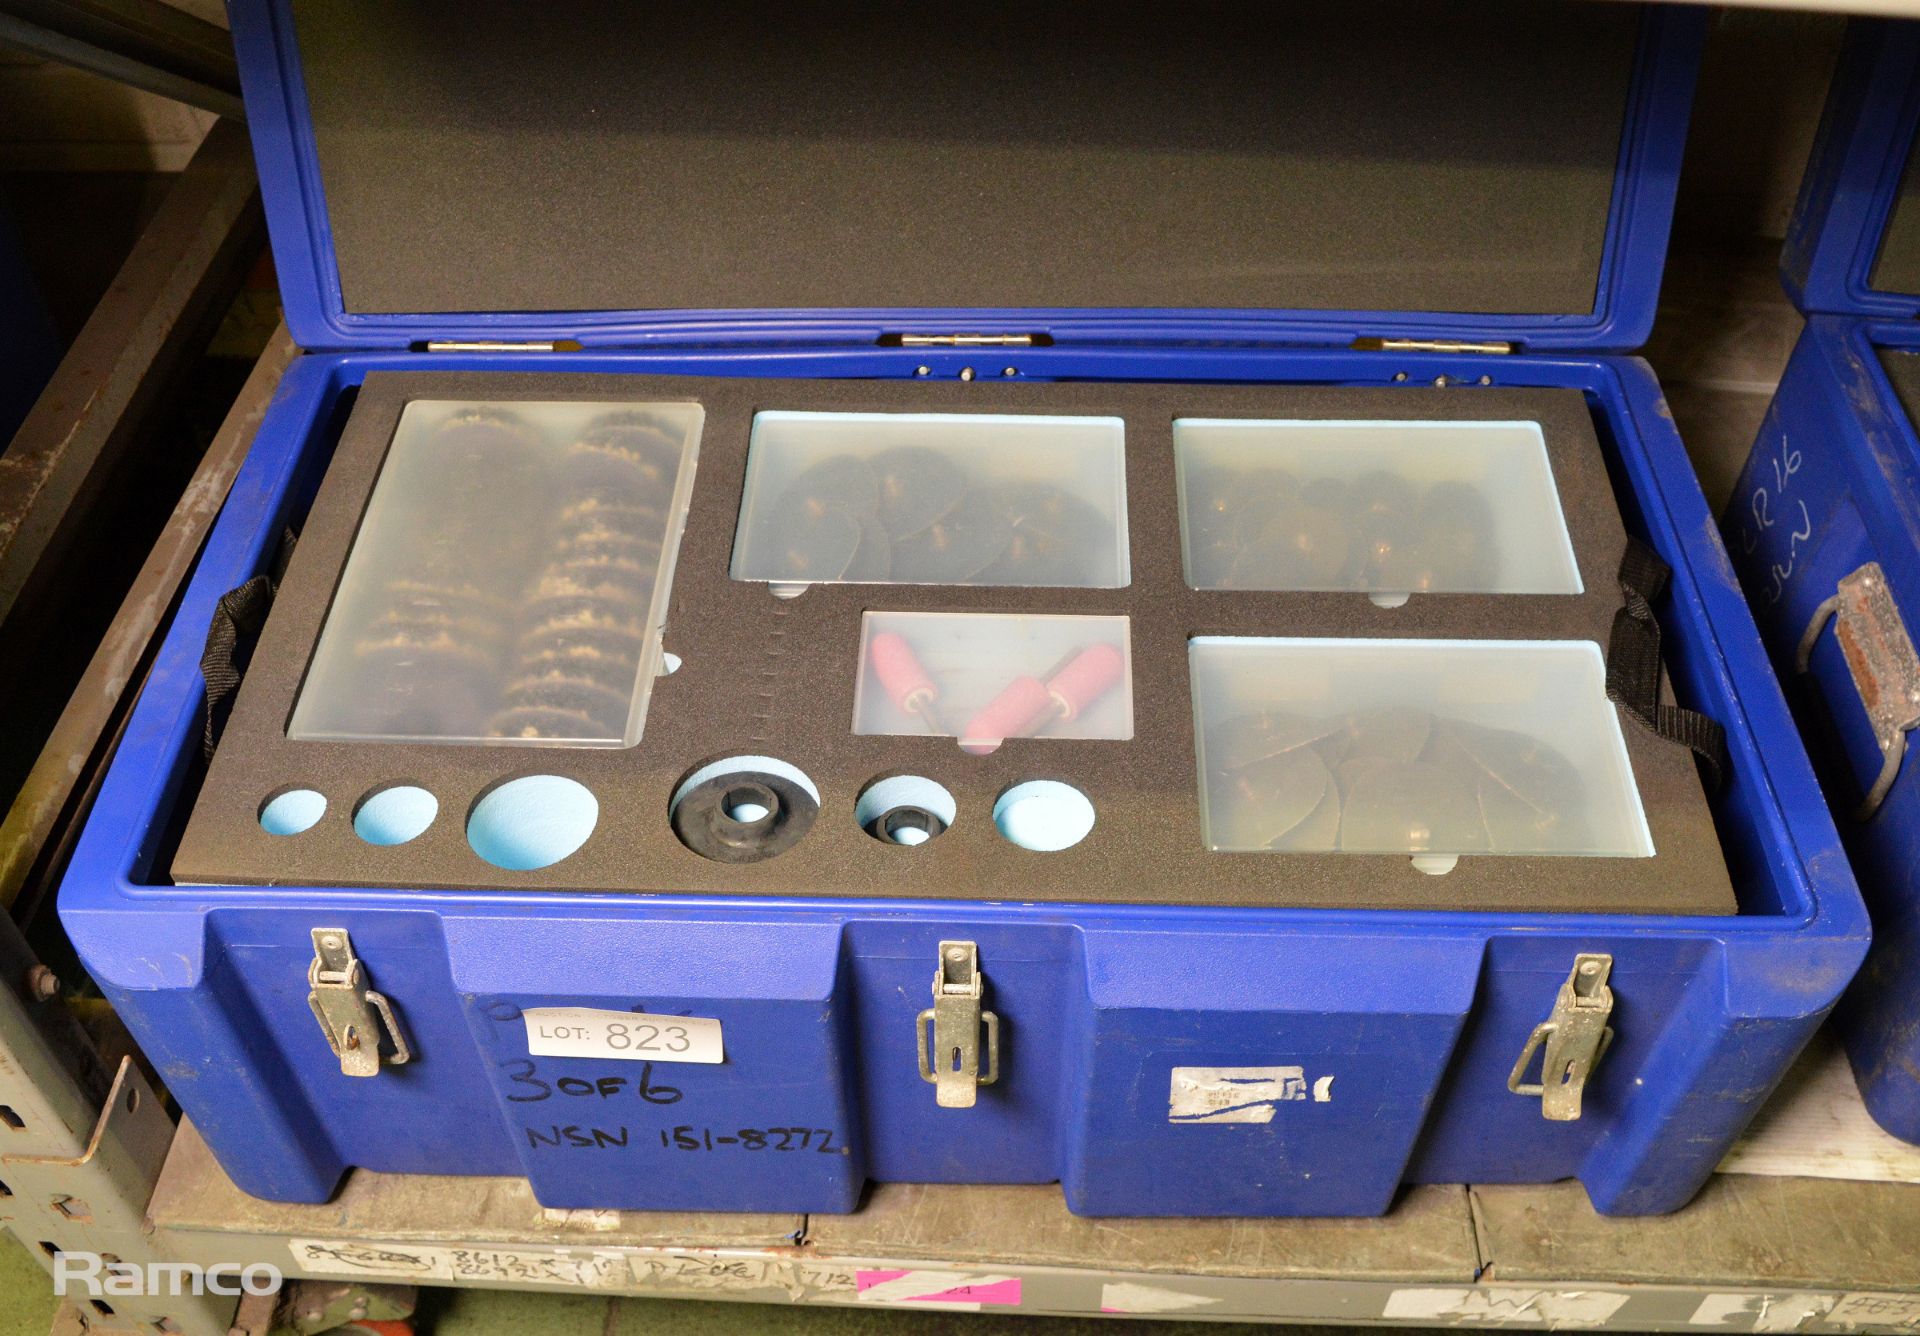 Corrosion removal kit in carry case - Image 2 of 7